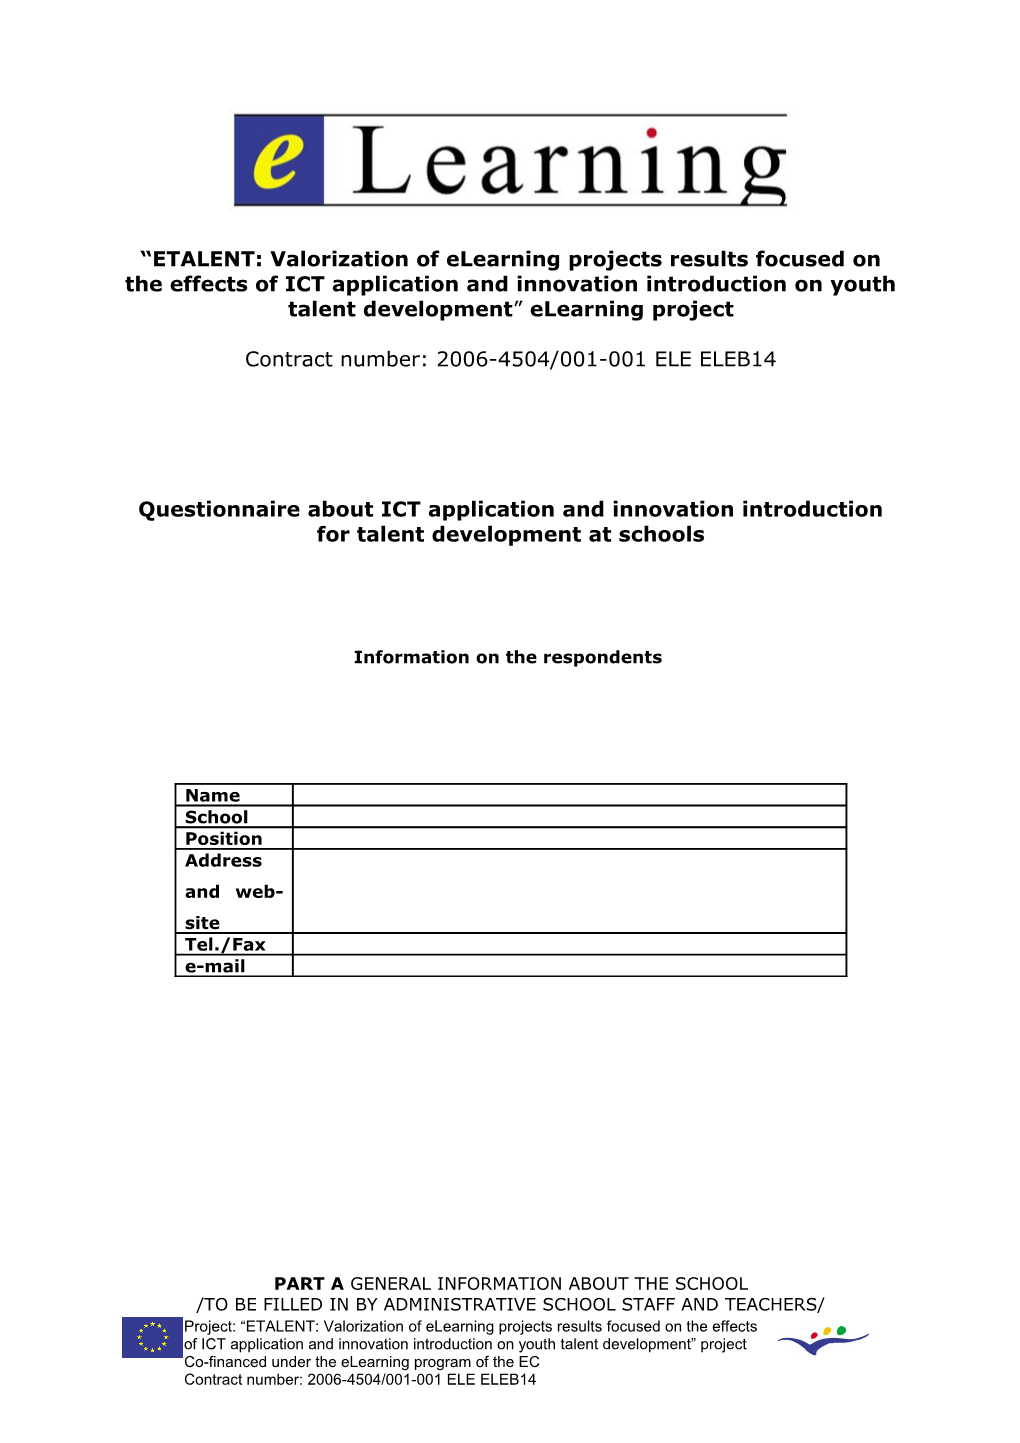 Questionnaire About ICT Application and Innovation Introduction for Talent Development